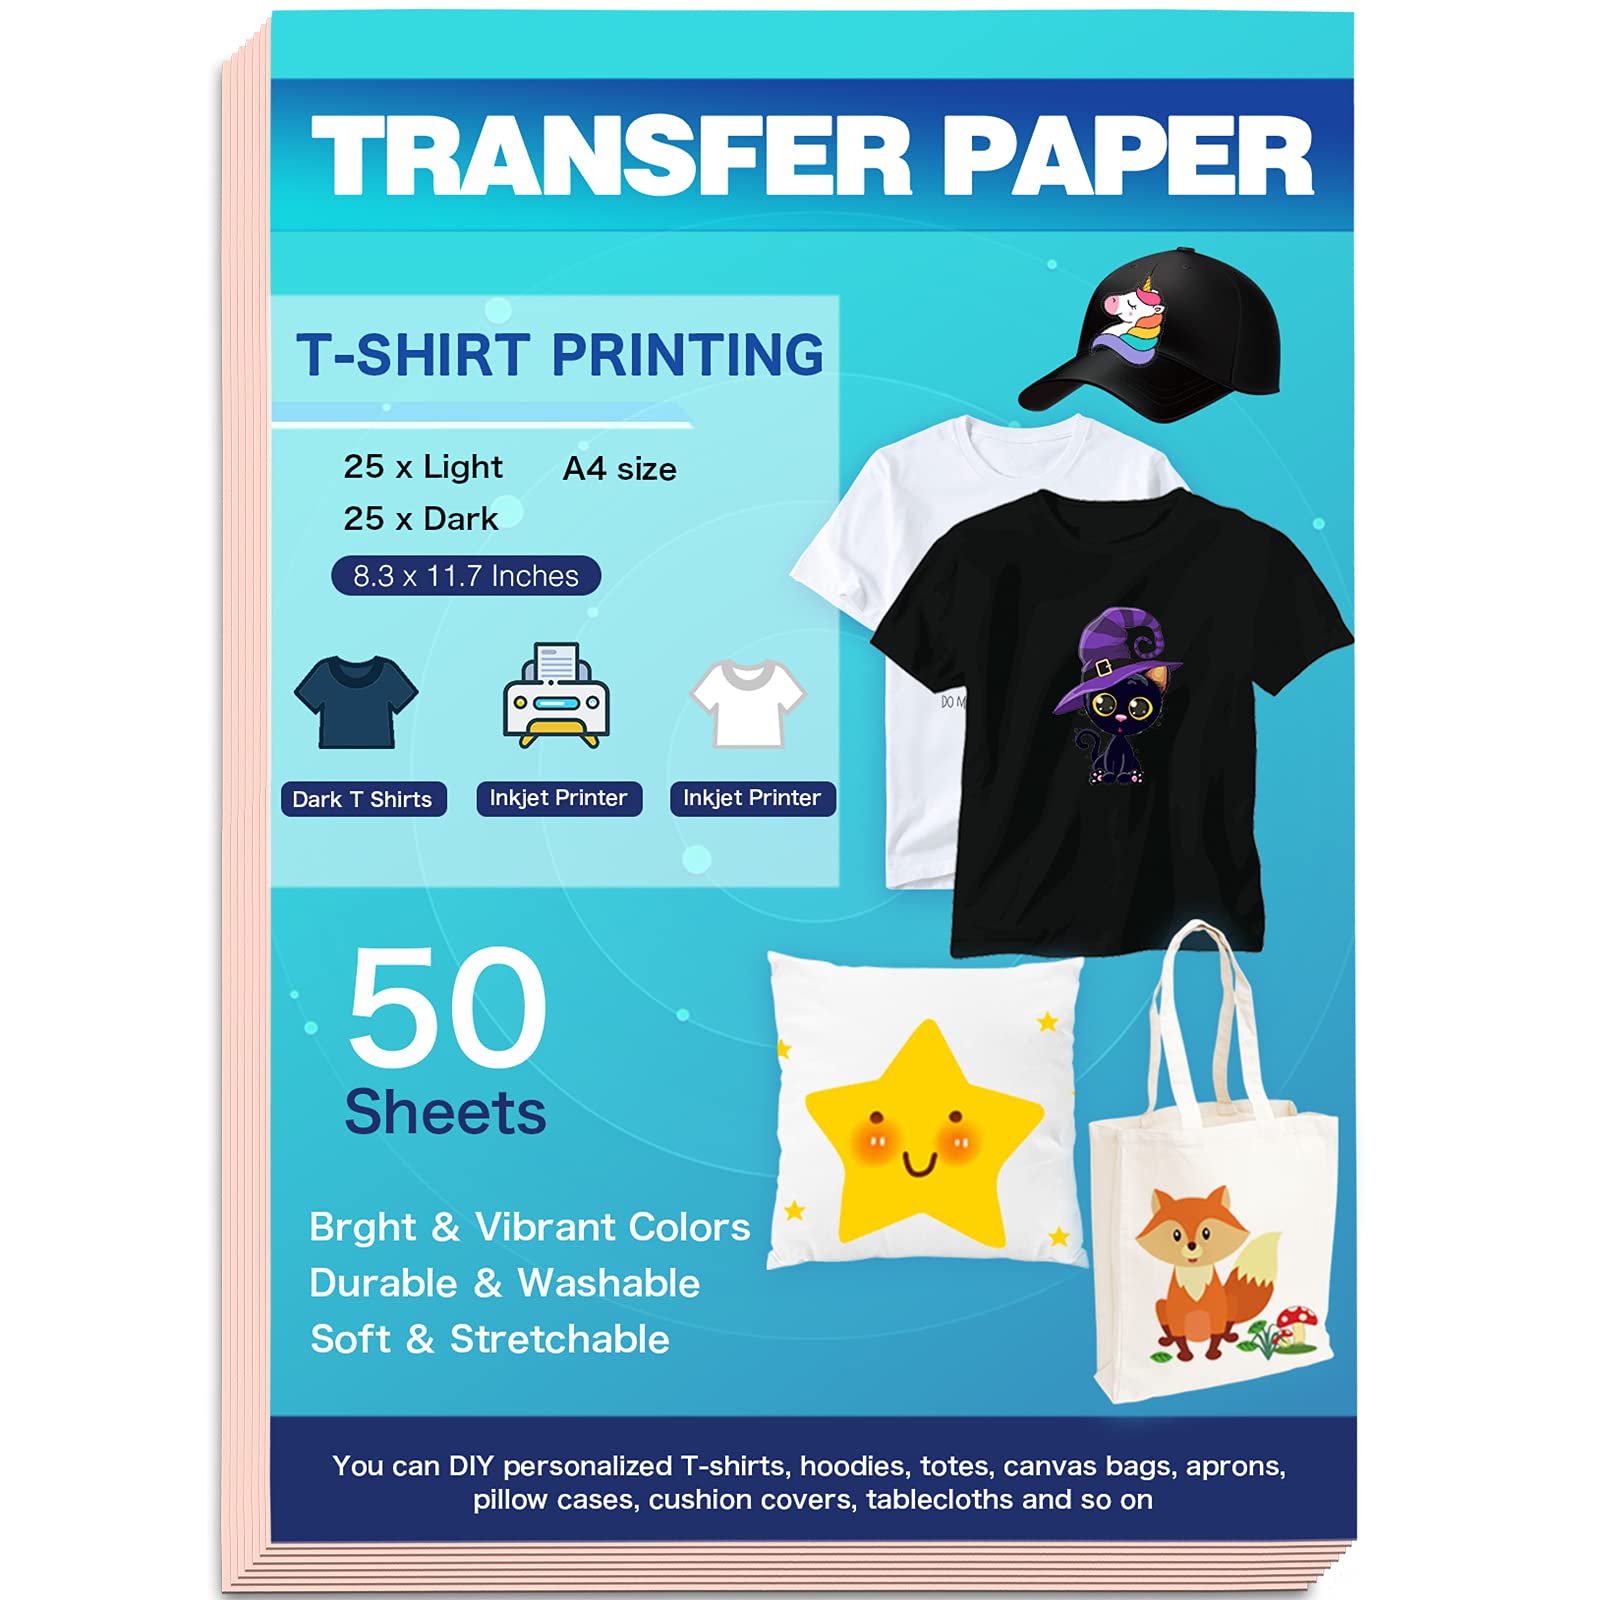 Transfer Heat Transfer Paper For Light Fabric T Shirt Printing Paper Inkjet  Transfer Paper For Clothing For Heat Press A4 6 Sheets